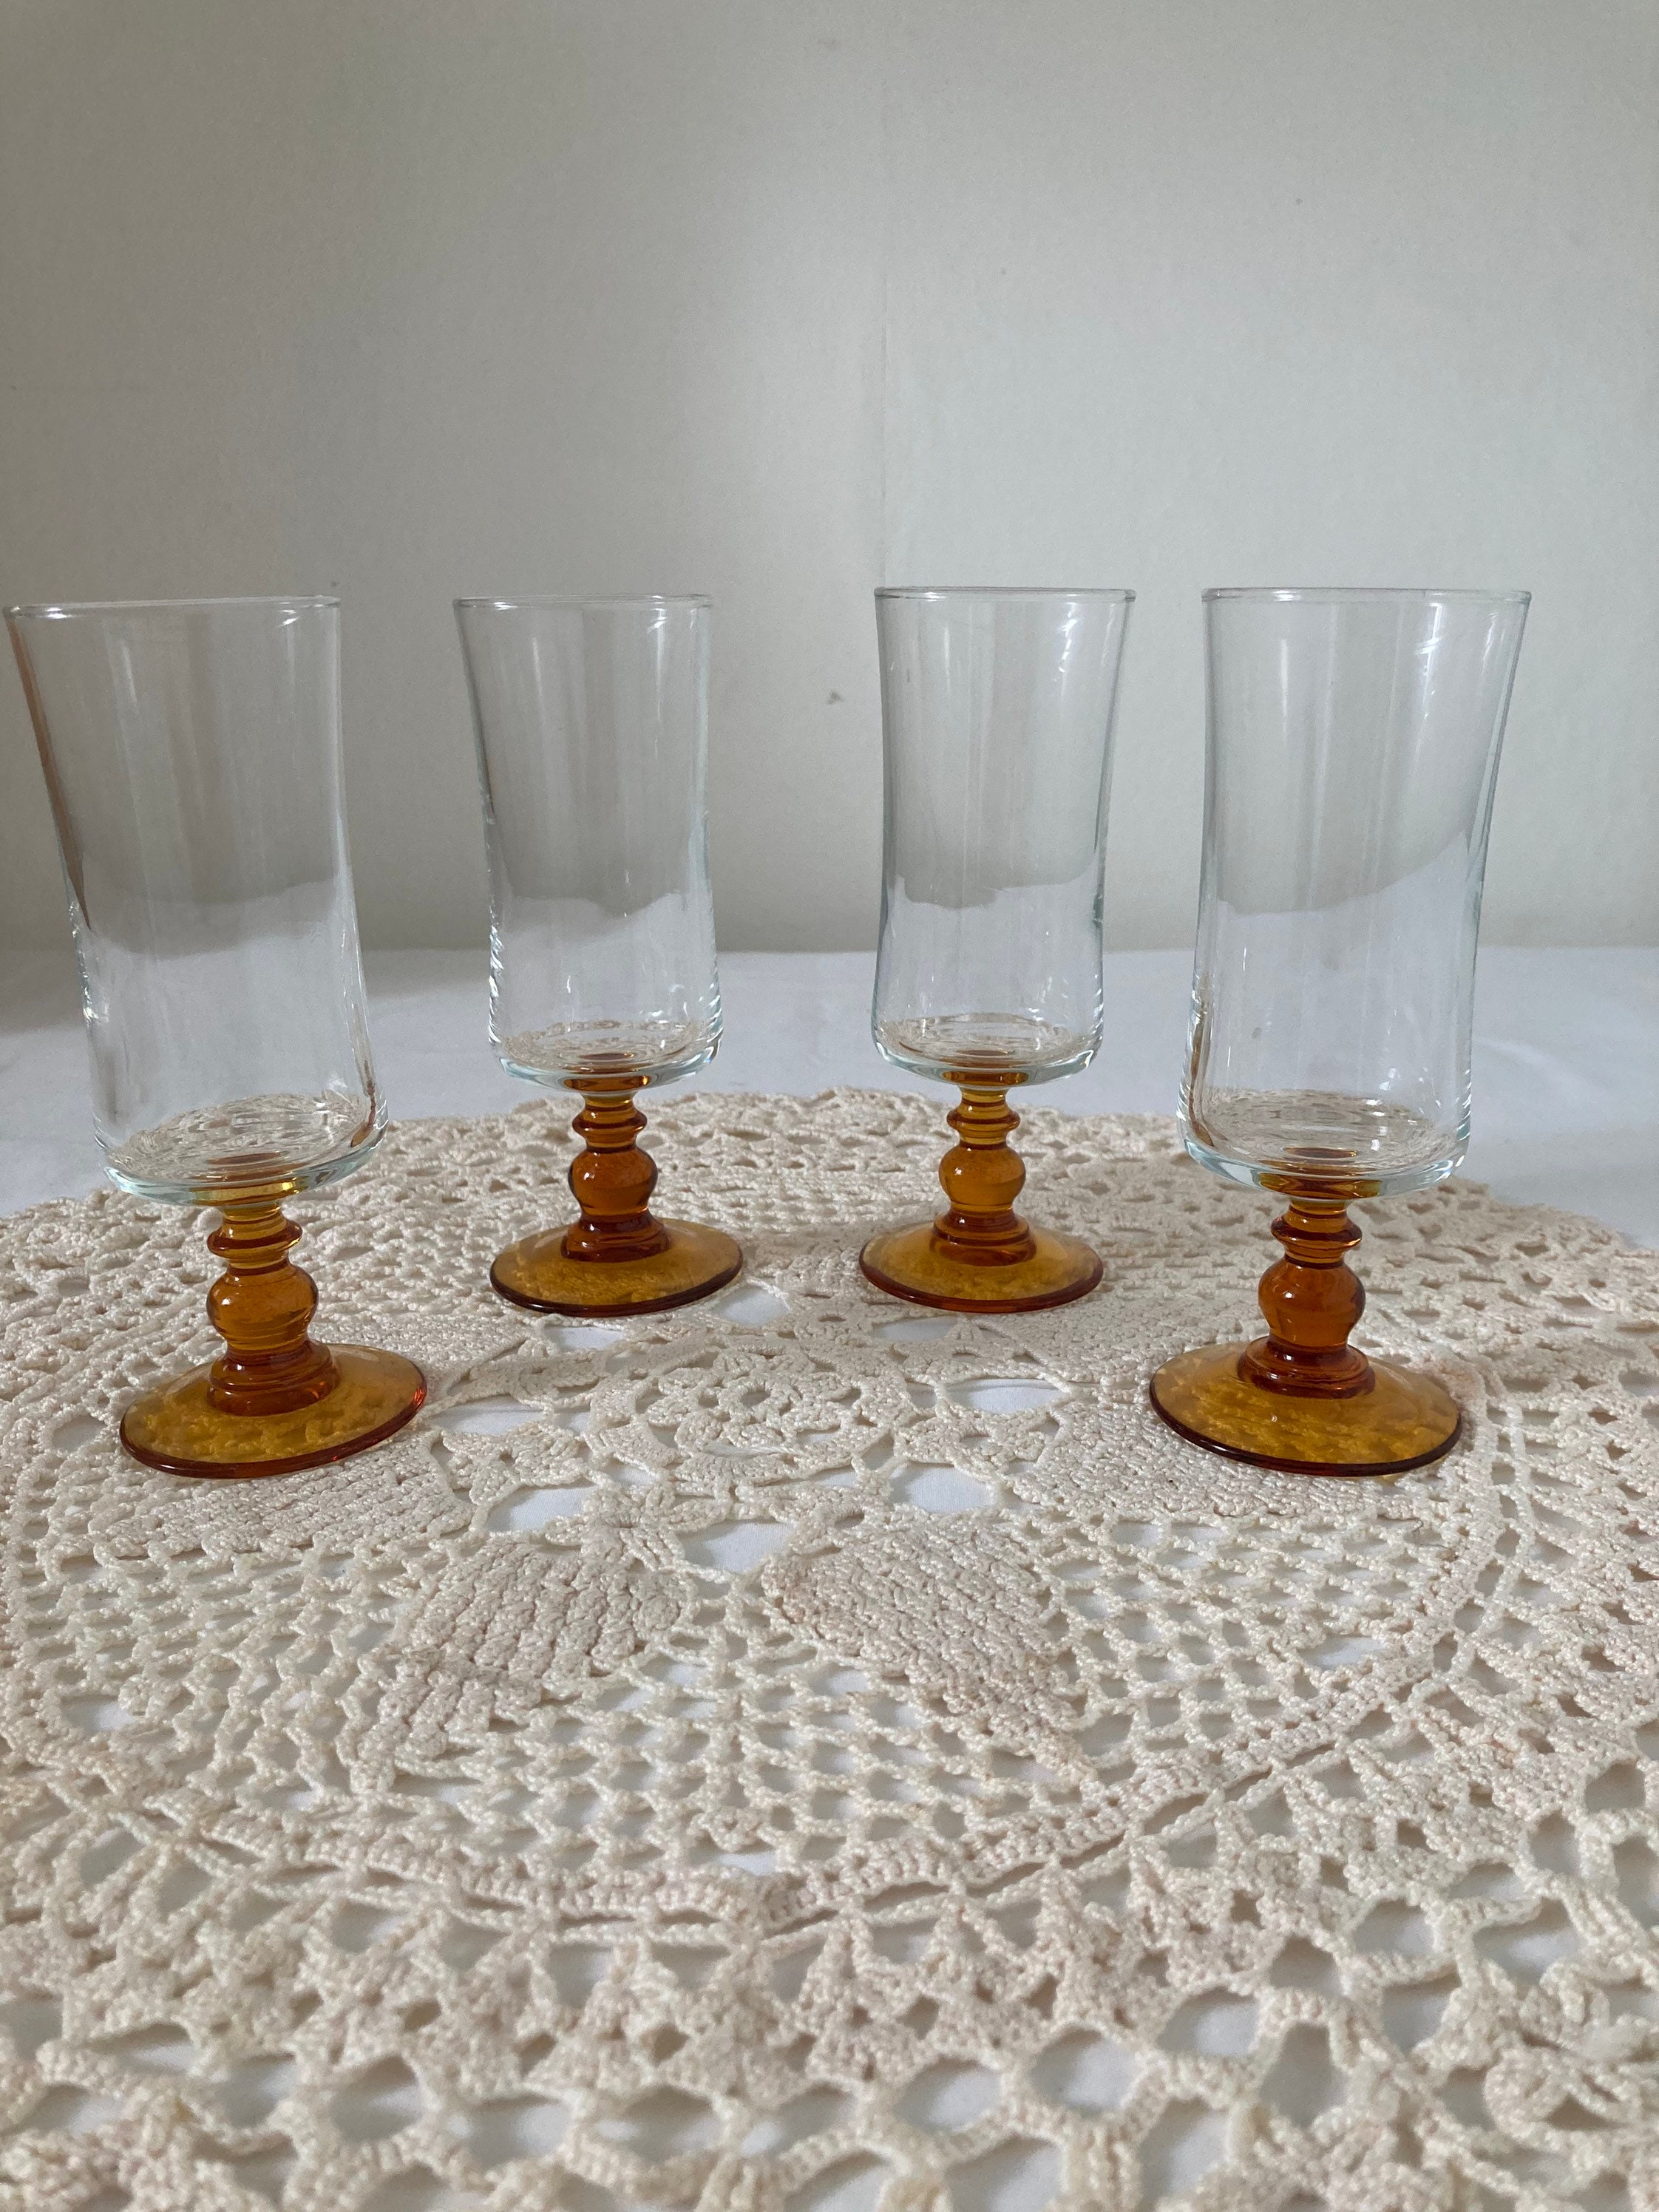 A Rare Set of Four French Etched Wine Glasses Signed Luminarc 1950s (item  #1468745)